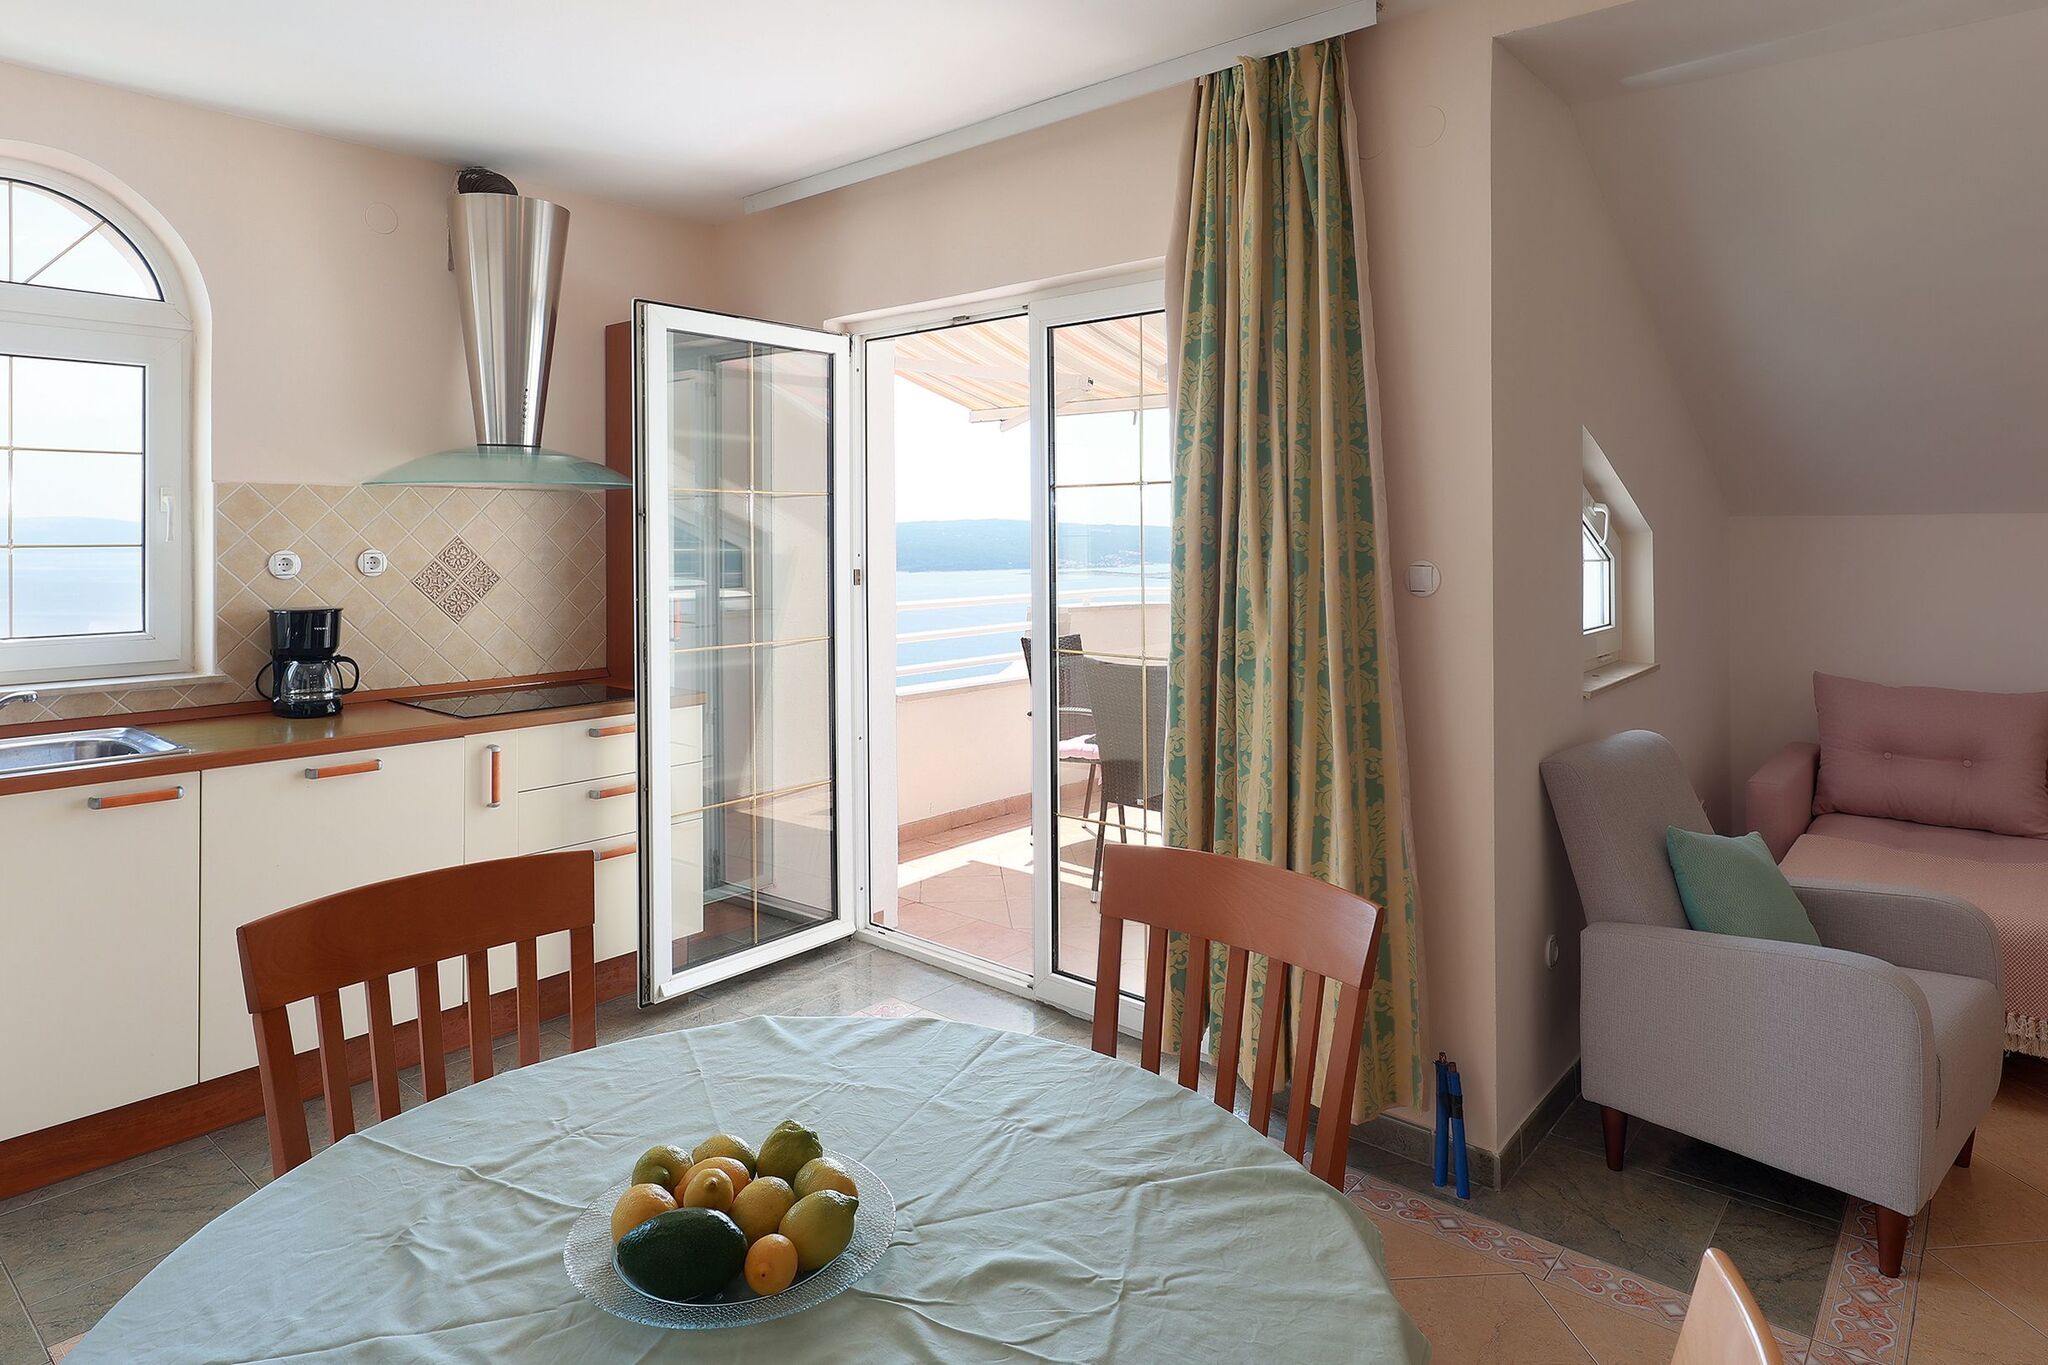 Appealing apartment in Dramalj with view